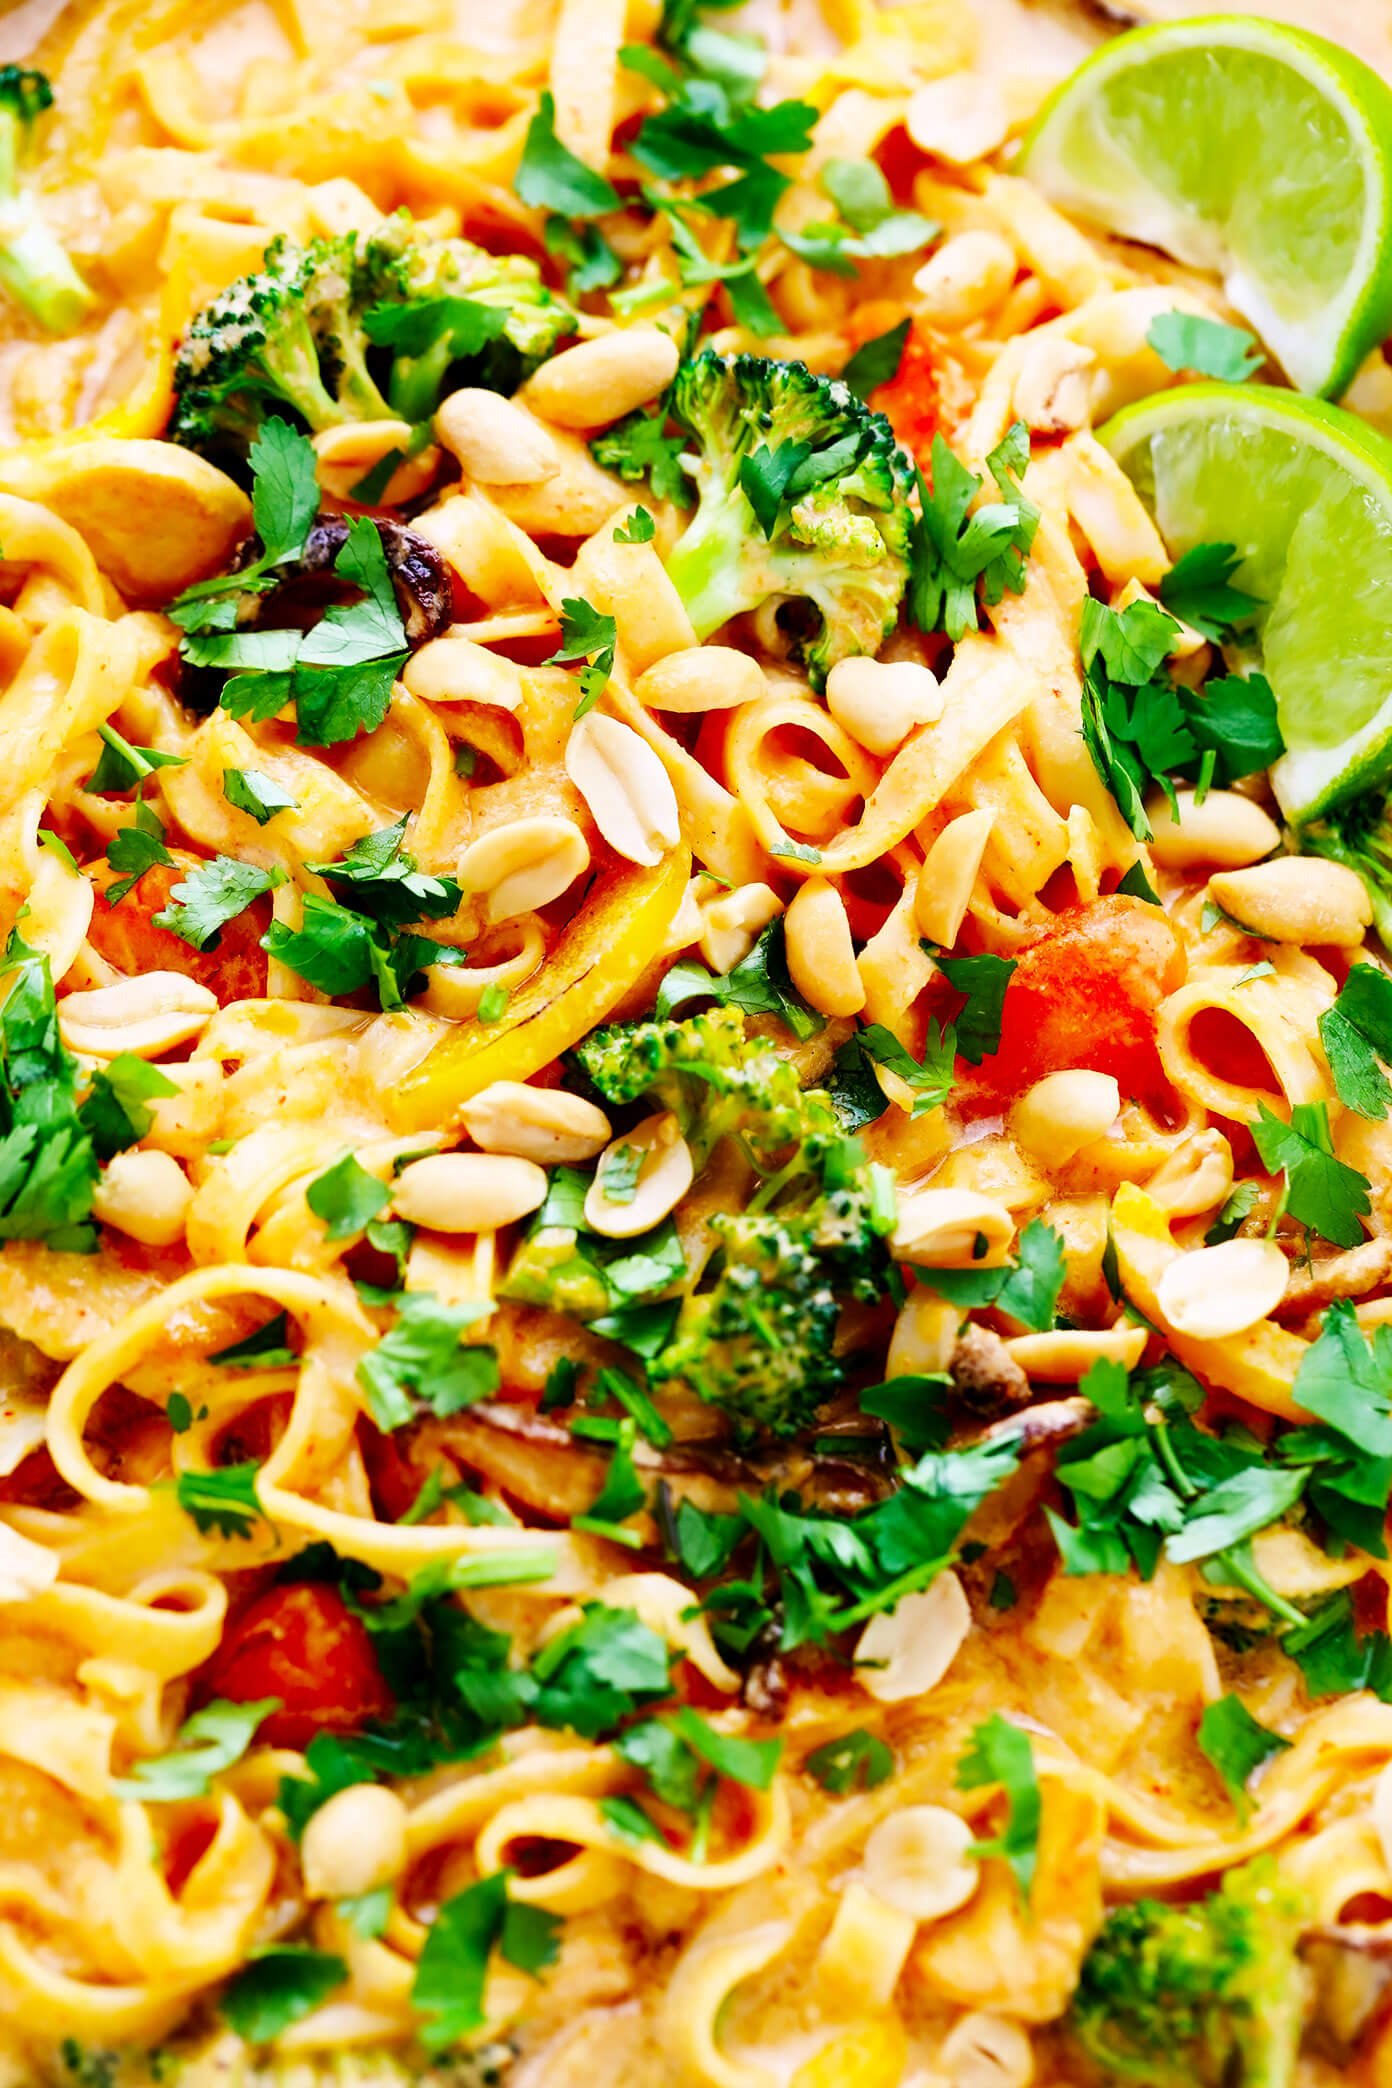 Thai Curry Peanut Noodles Closeup with Limes and Cilantro